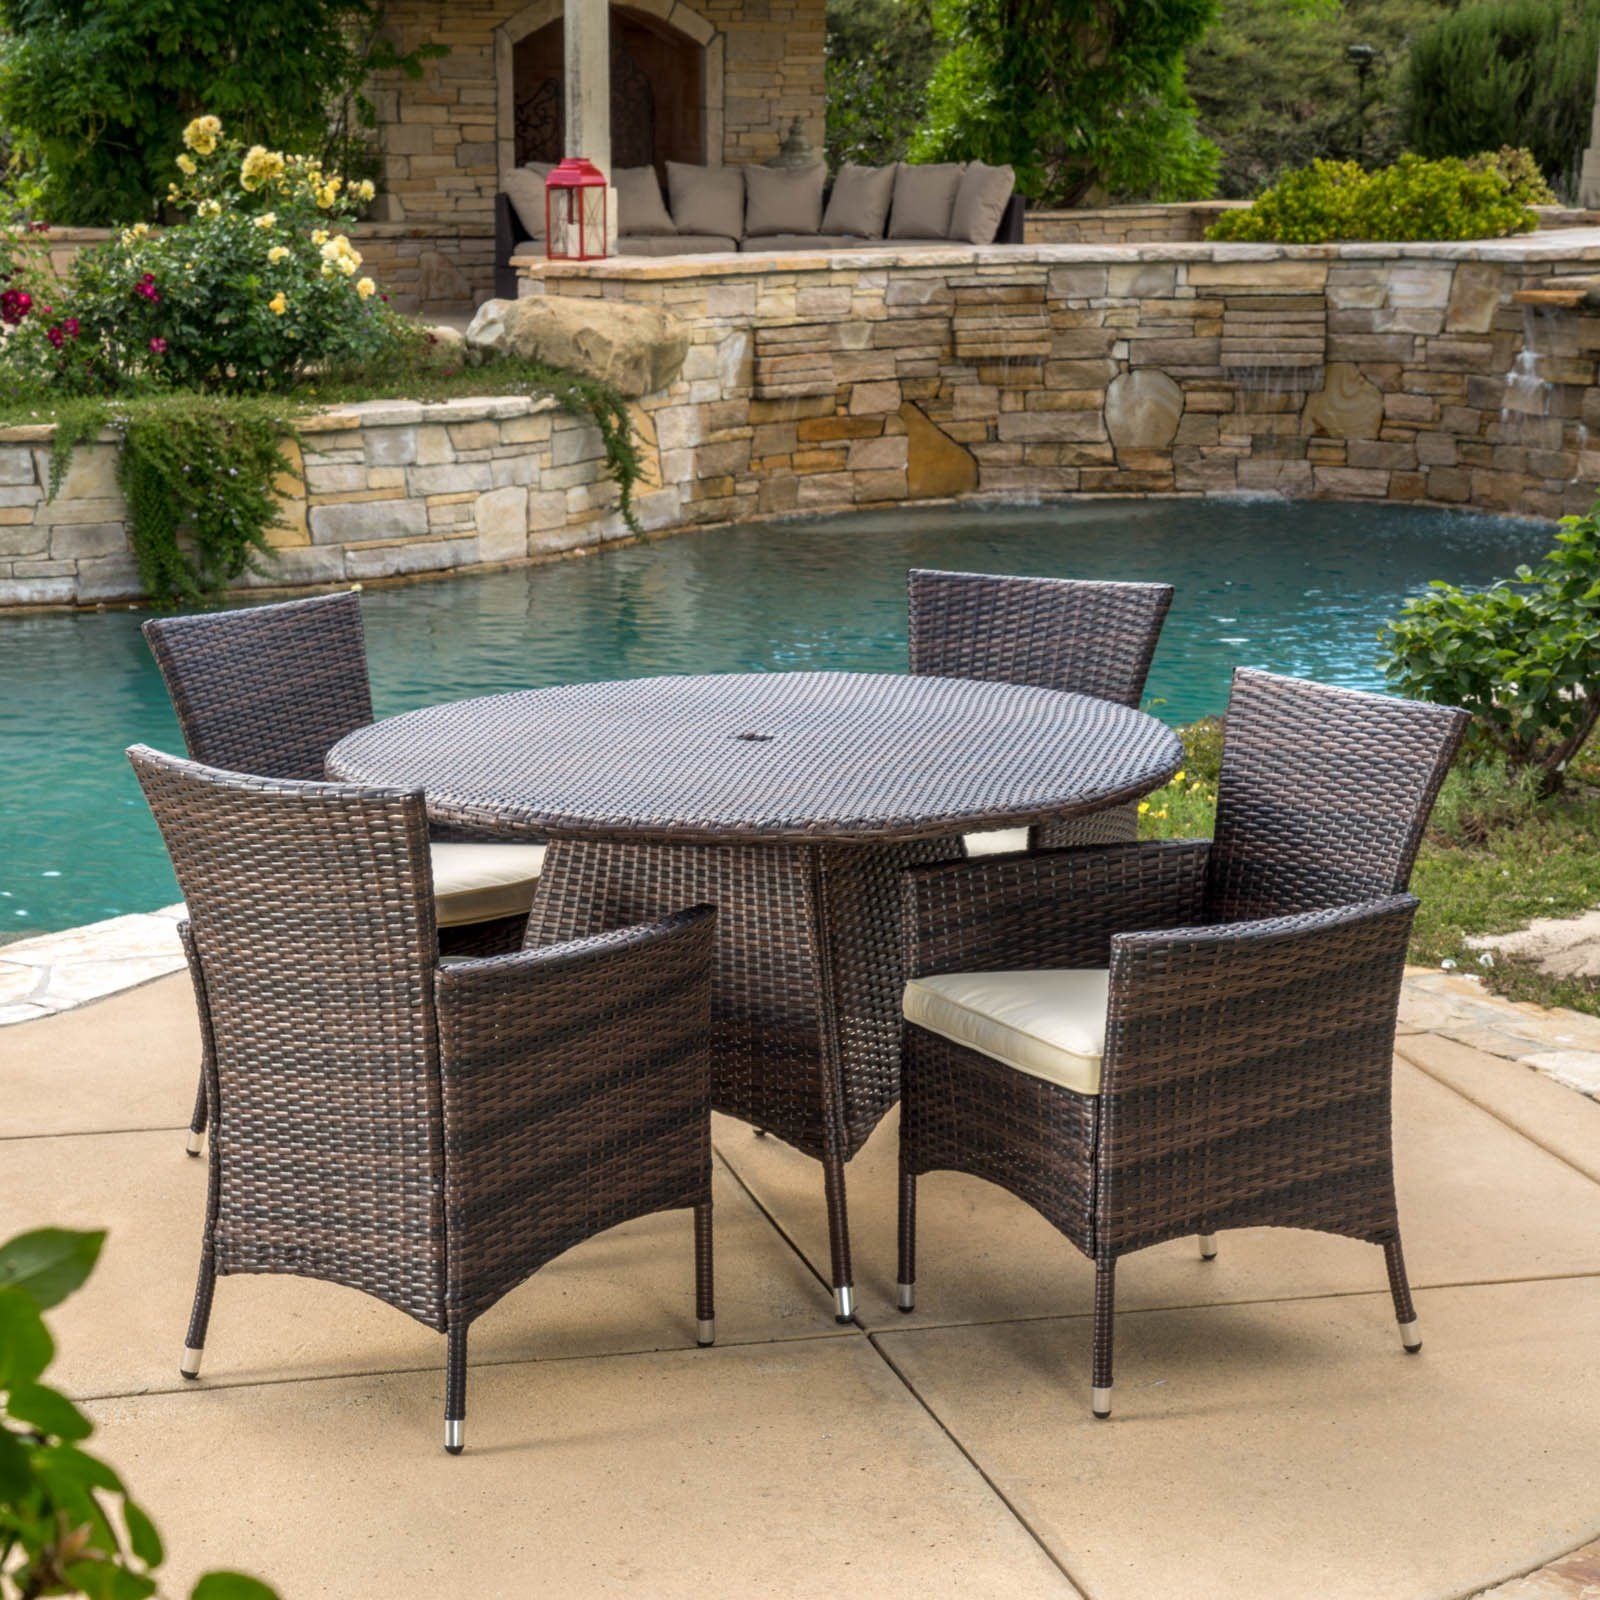 Madison Wicker 5 Piece Round Patio Dining Set With Cushions – Walmart With Regard To 5 Piece Round Dining Sets (View 14 of 15)